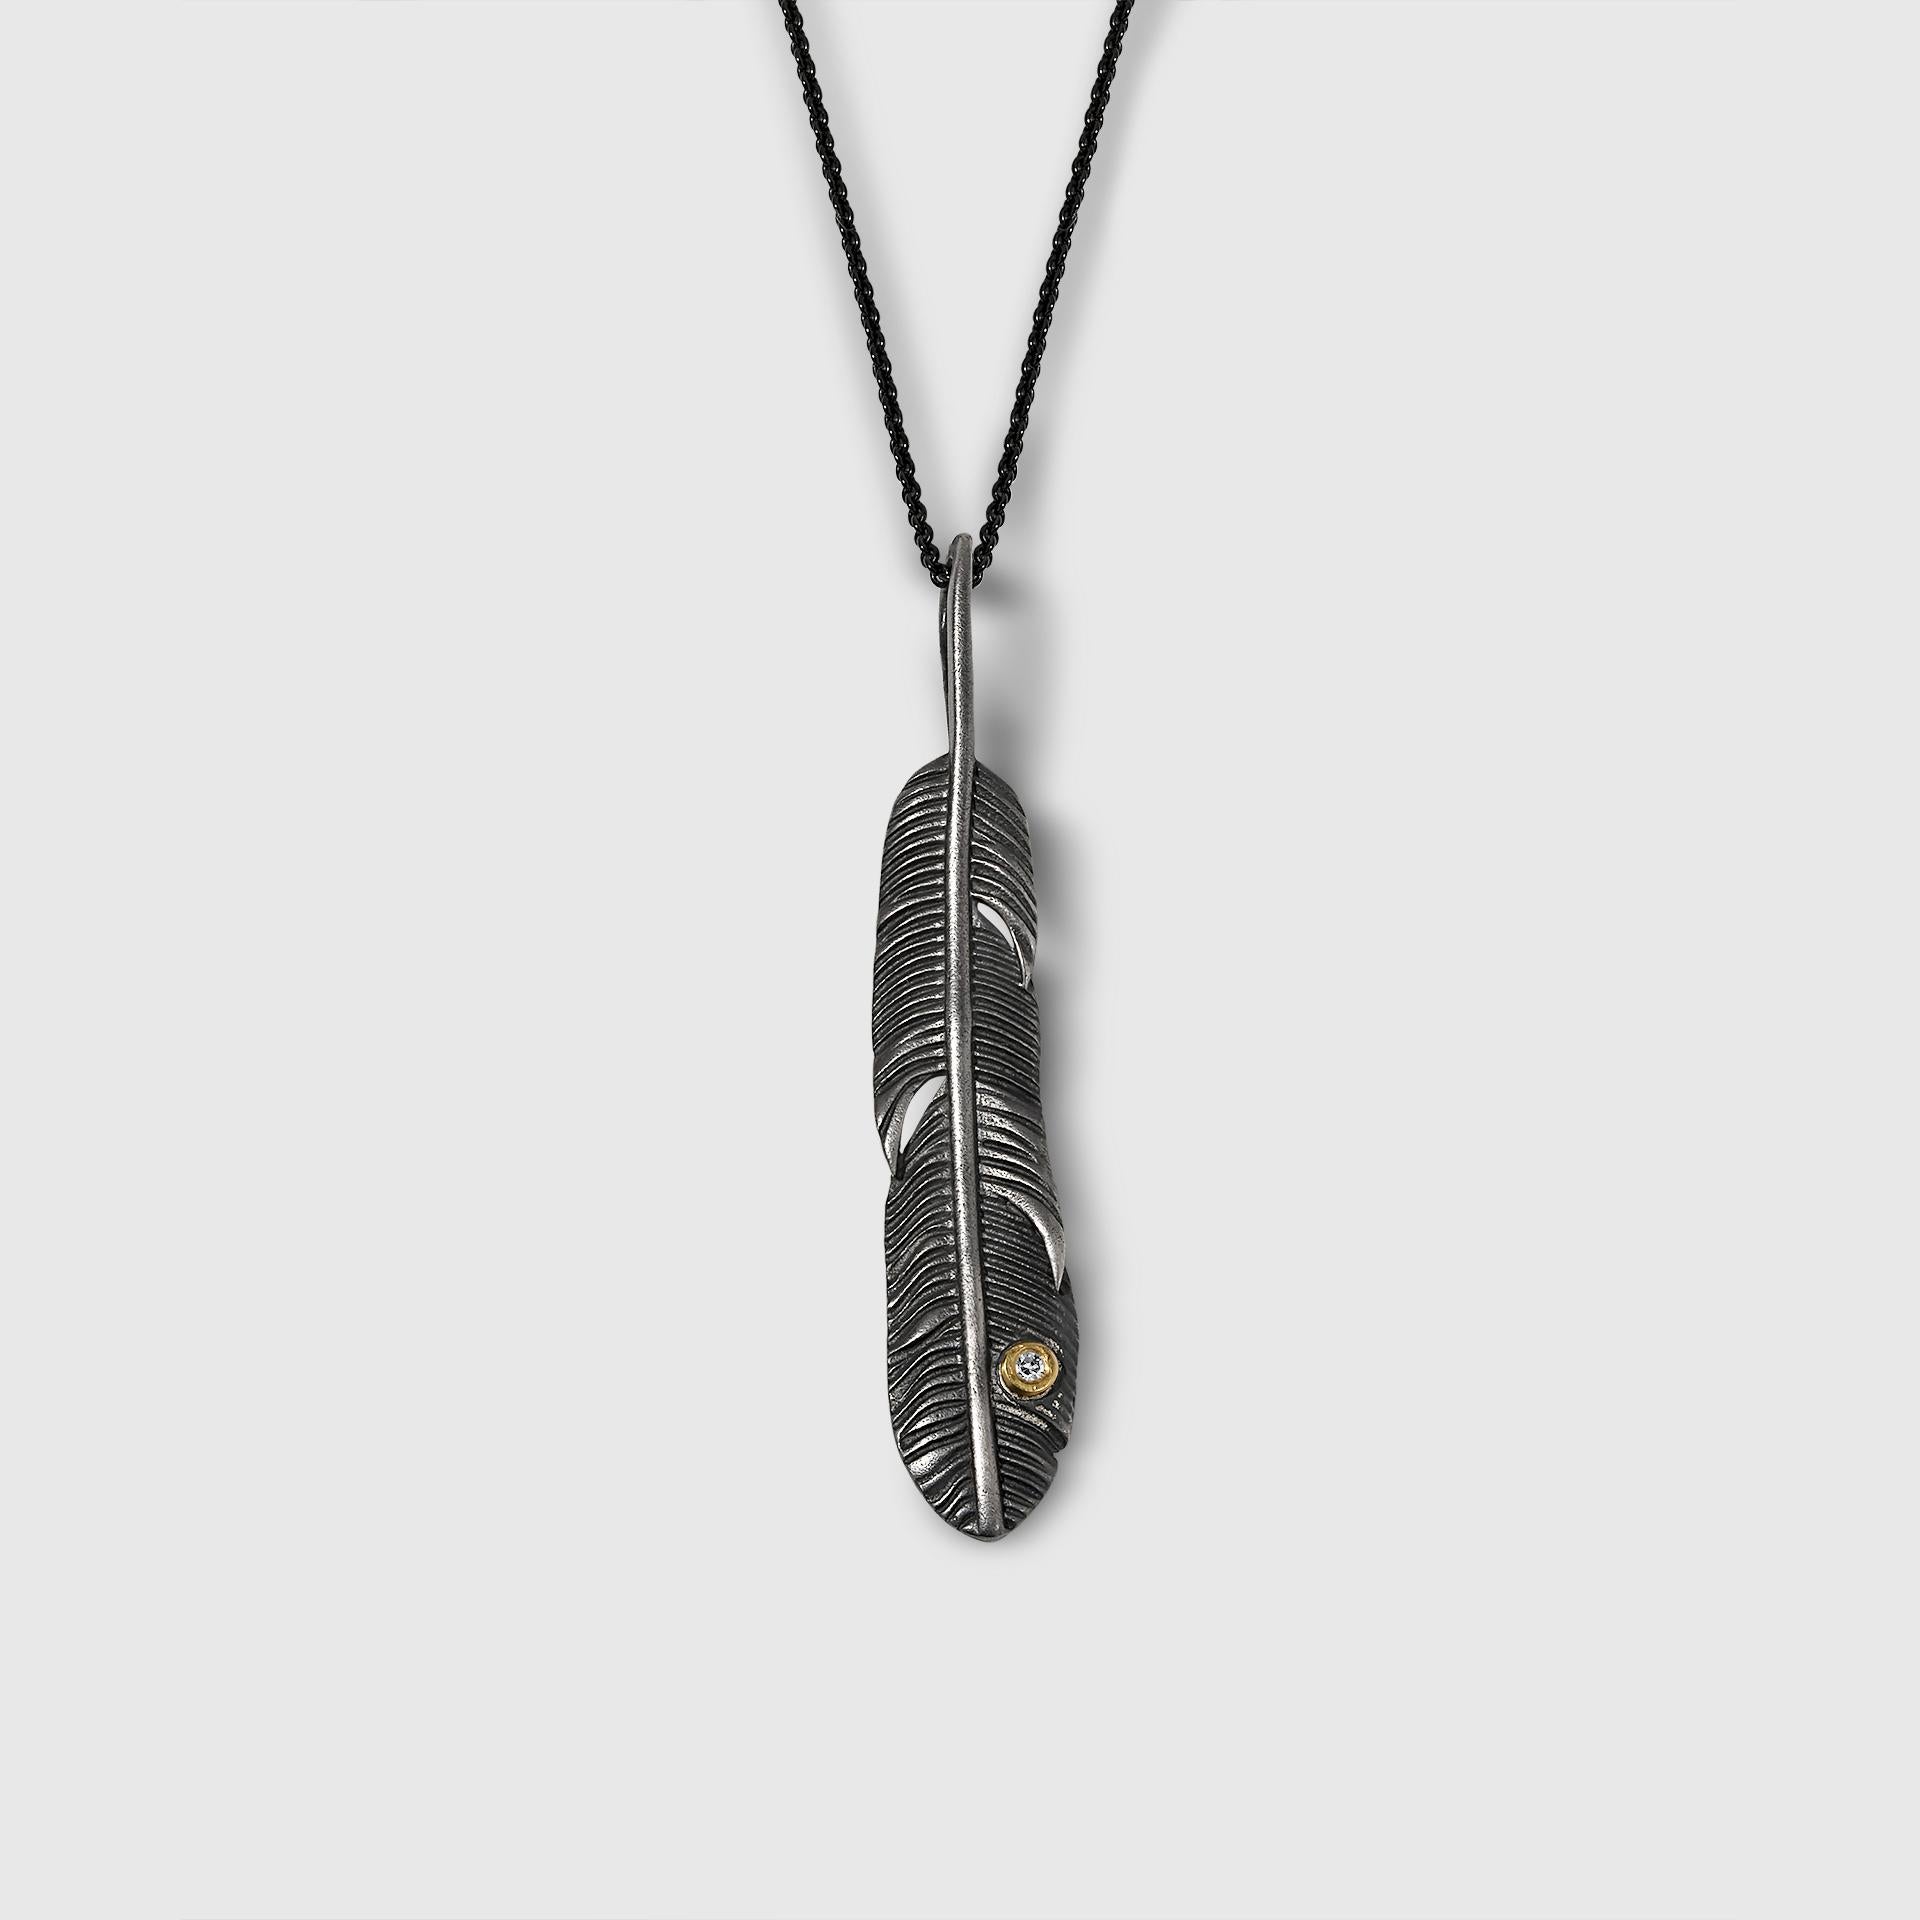 Feather Charm Pendant with Diamond, 24K and Sterling Silver, Handmade by Prehistoric Works of Istanbul, Turkey
Pendant Details:
Length - 2 1/5”
Width - 1/2”
24K Gold Bezel - 0.10 grams
Sterling S925 - 5.28 grams
Diamond - 0.02 ct
Pendant comes with